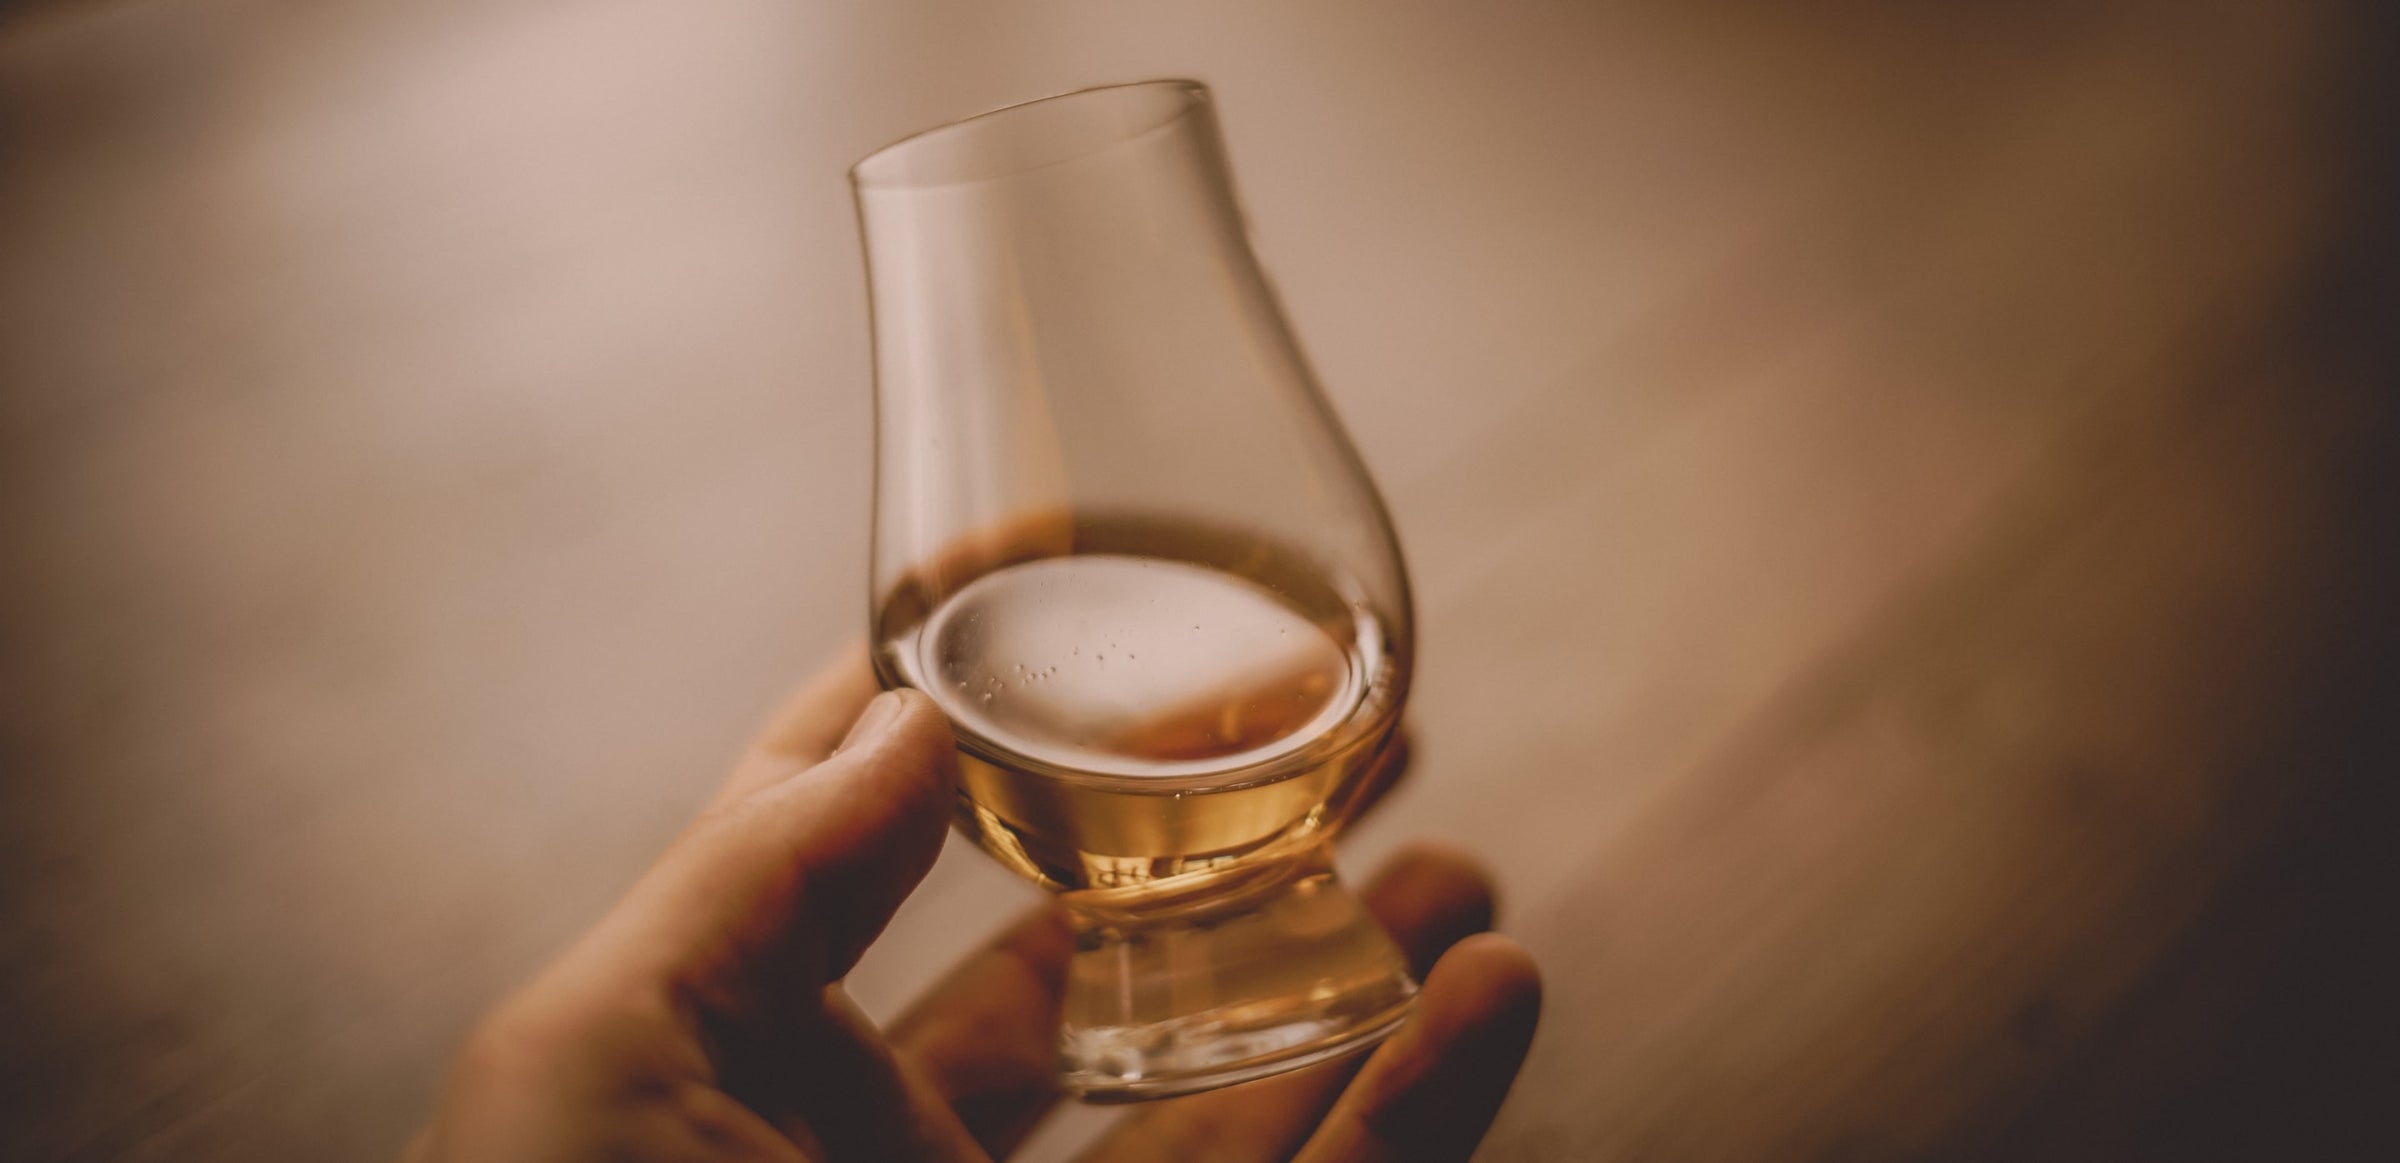 Glass of whisky being held in an open palm with